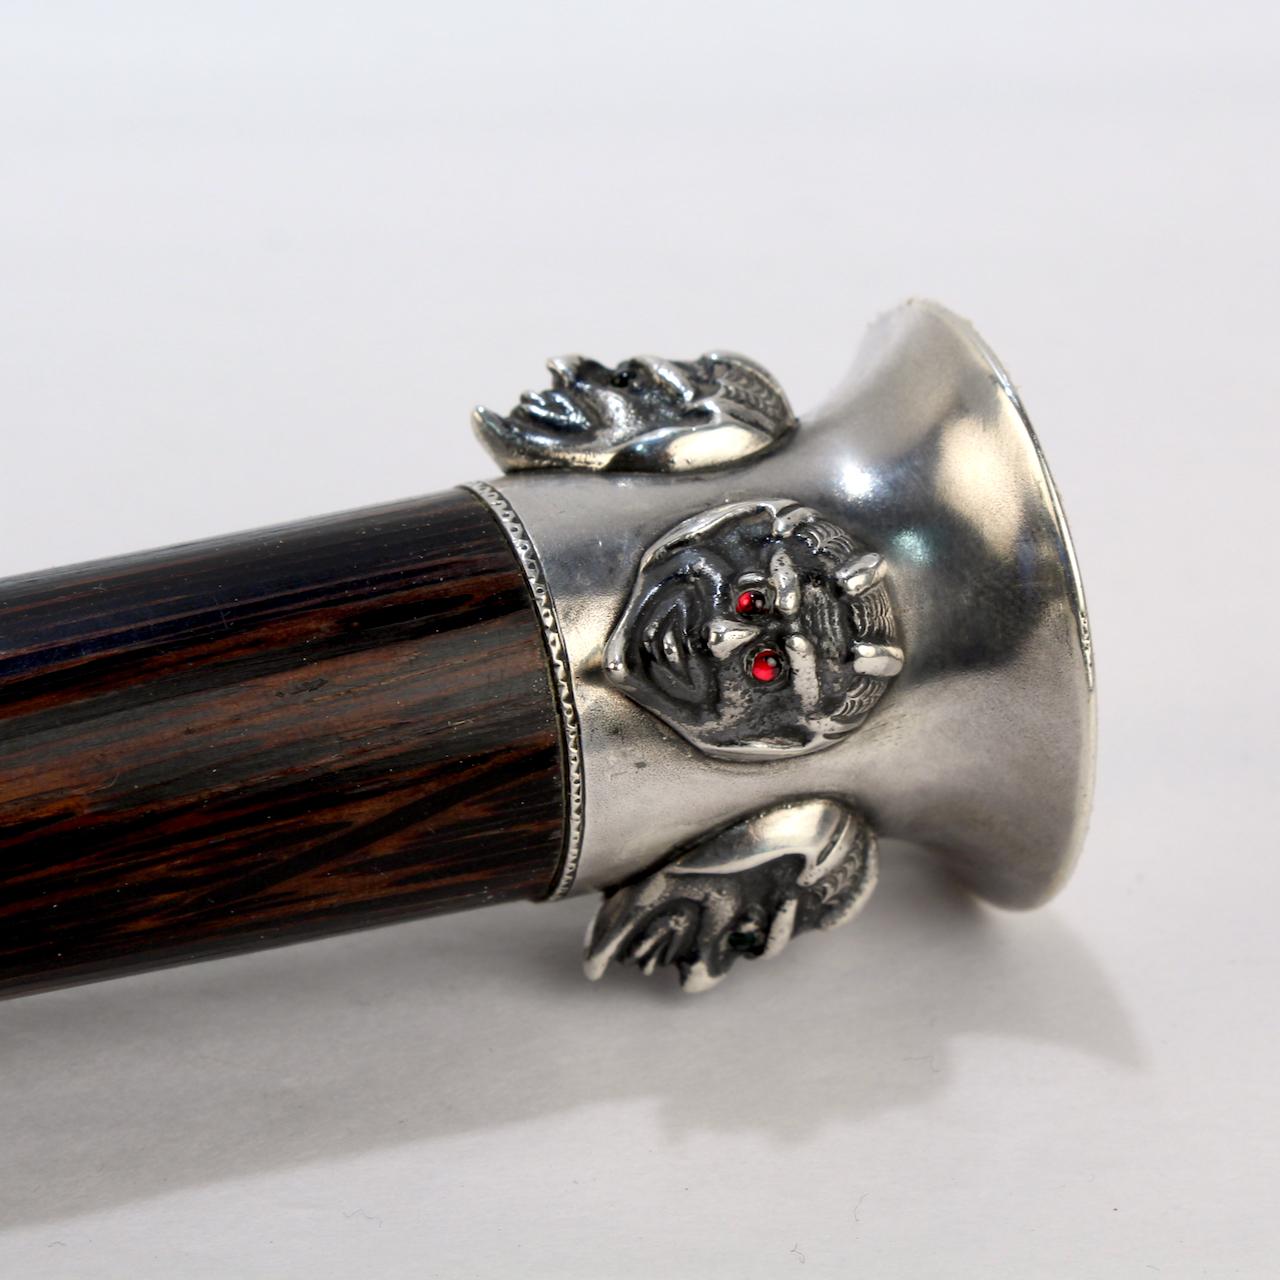 A fine Edwardian cane or walking stick.

With a silver cane handle that has 4 devil's heads or masks around its circumference. The faces have alternately tiny ruby red and emerald green glass cabochon eyes. 

The top of the handle is engraved